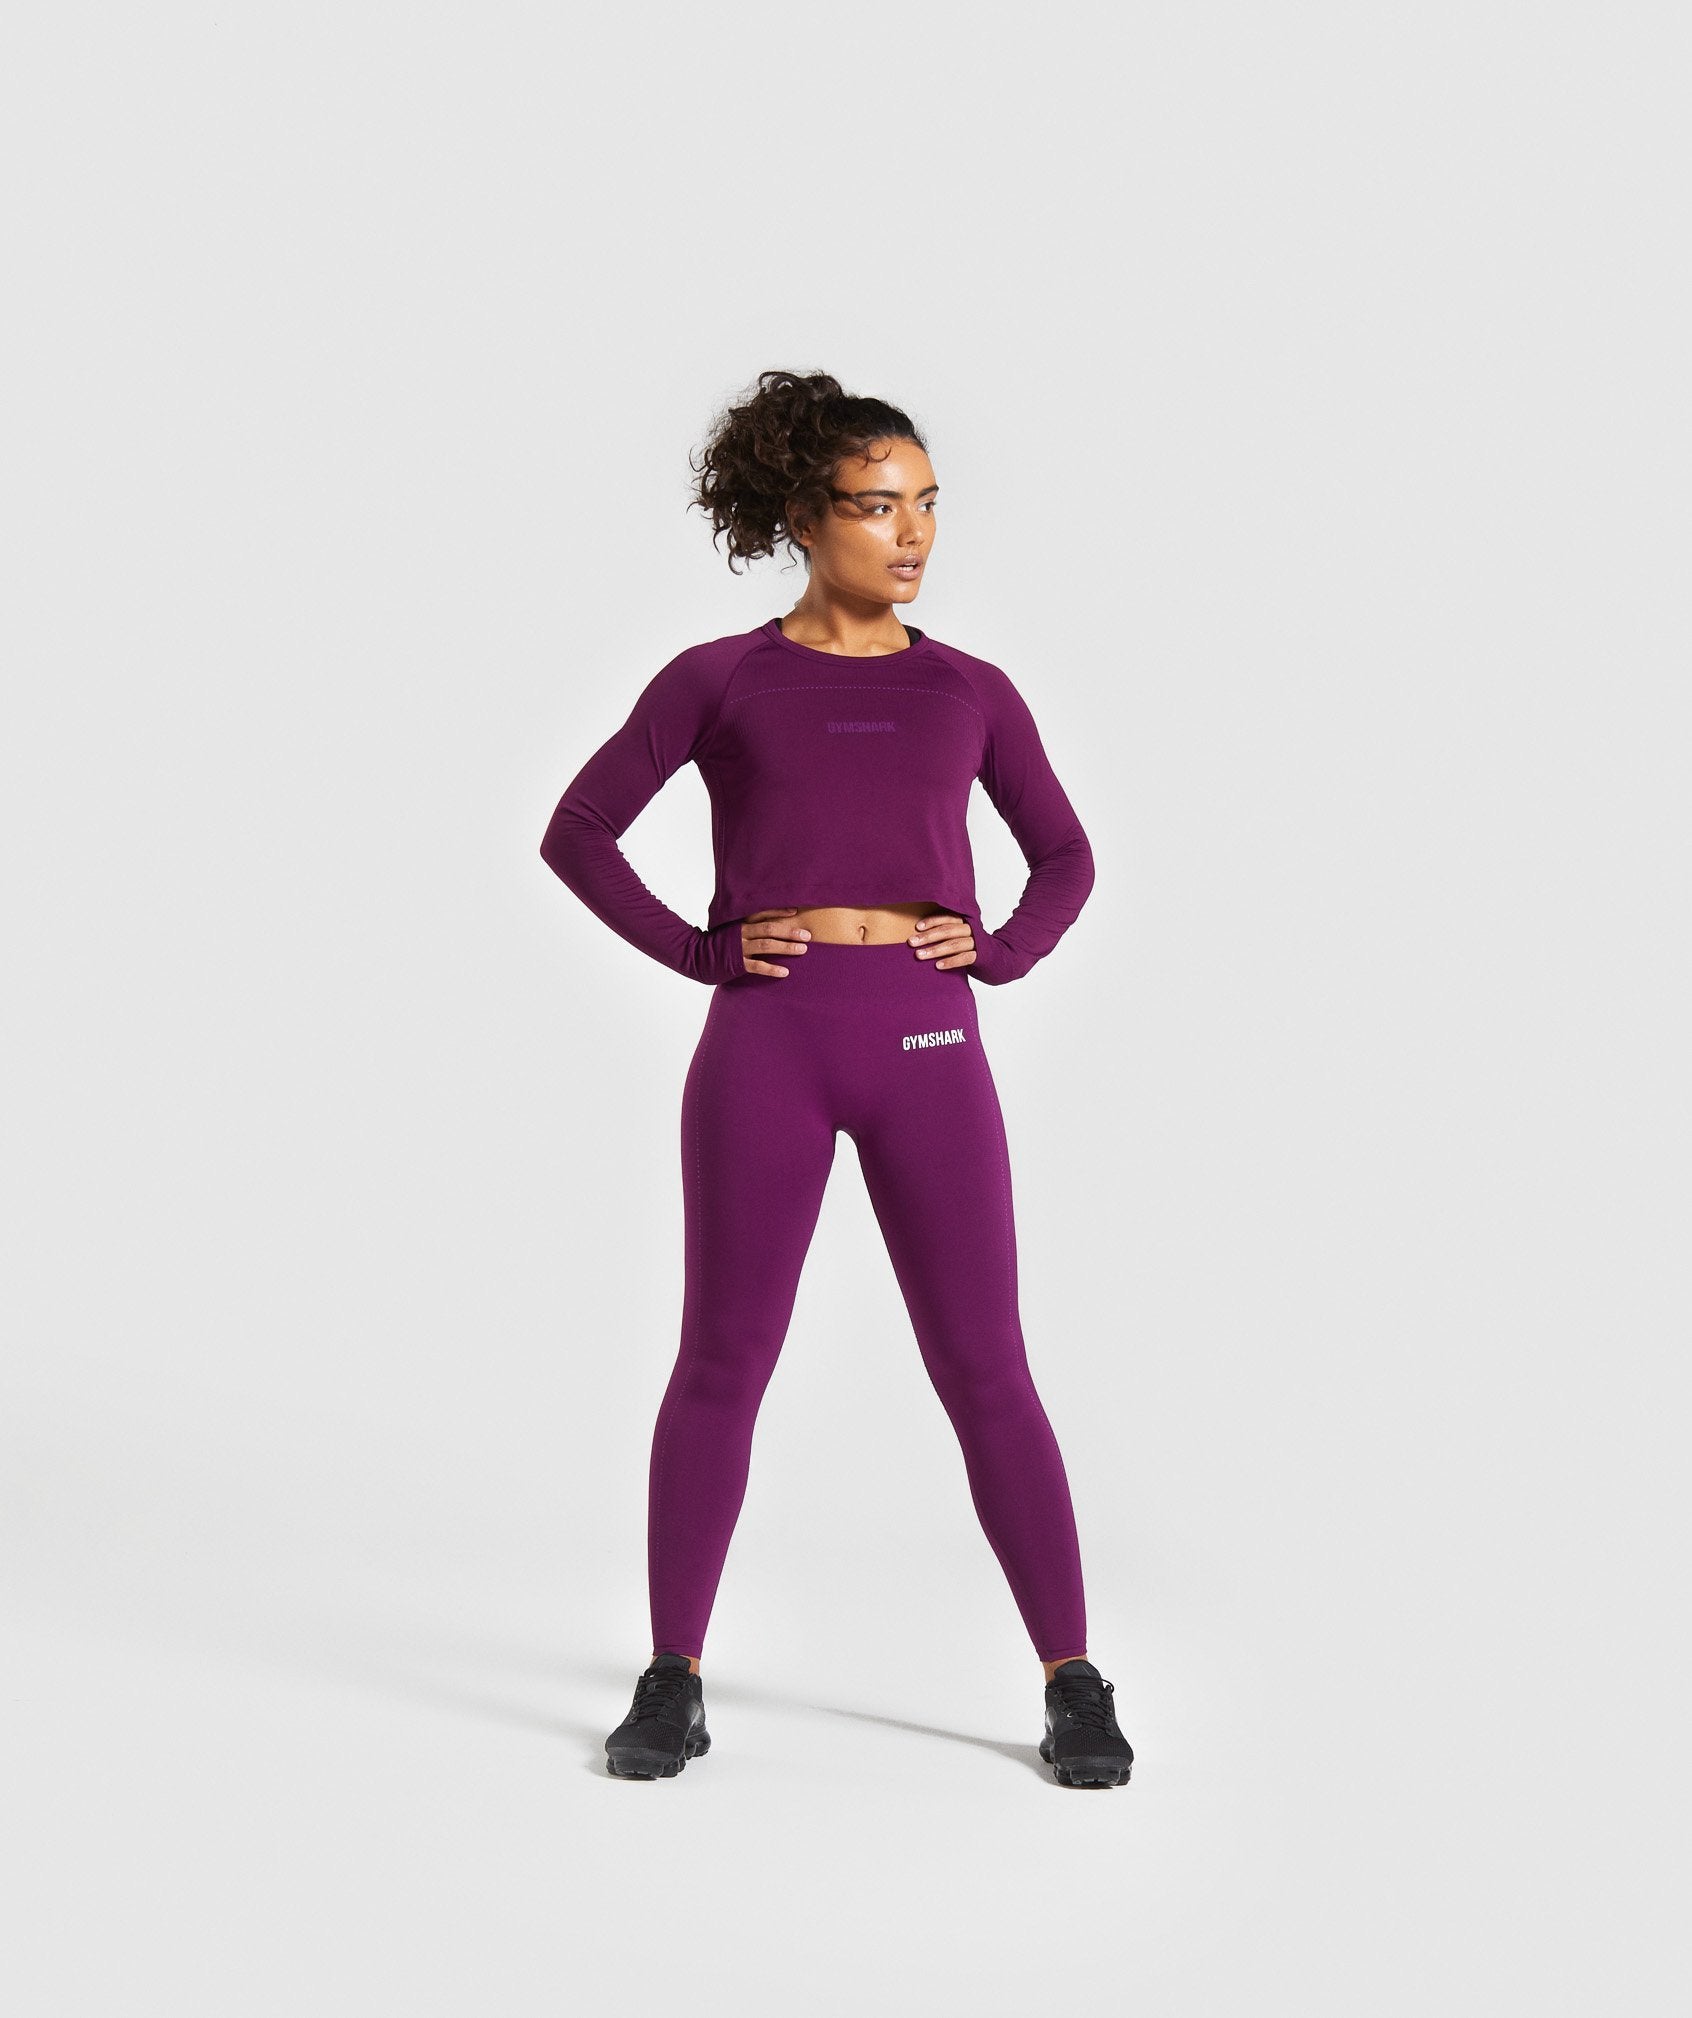 Breeze Lightweight Seamless Tights in Purple - view 4